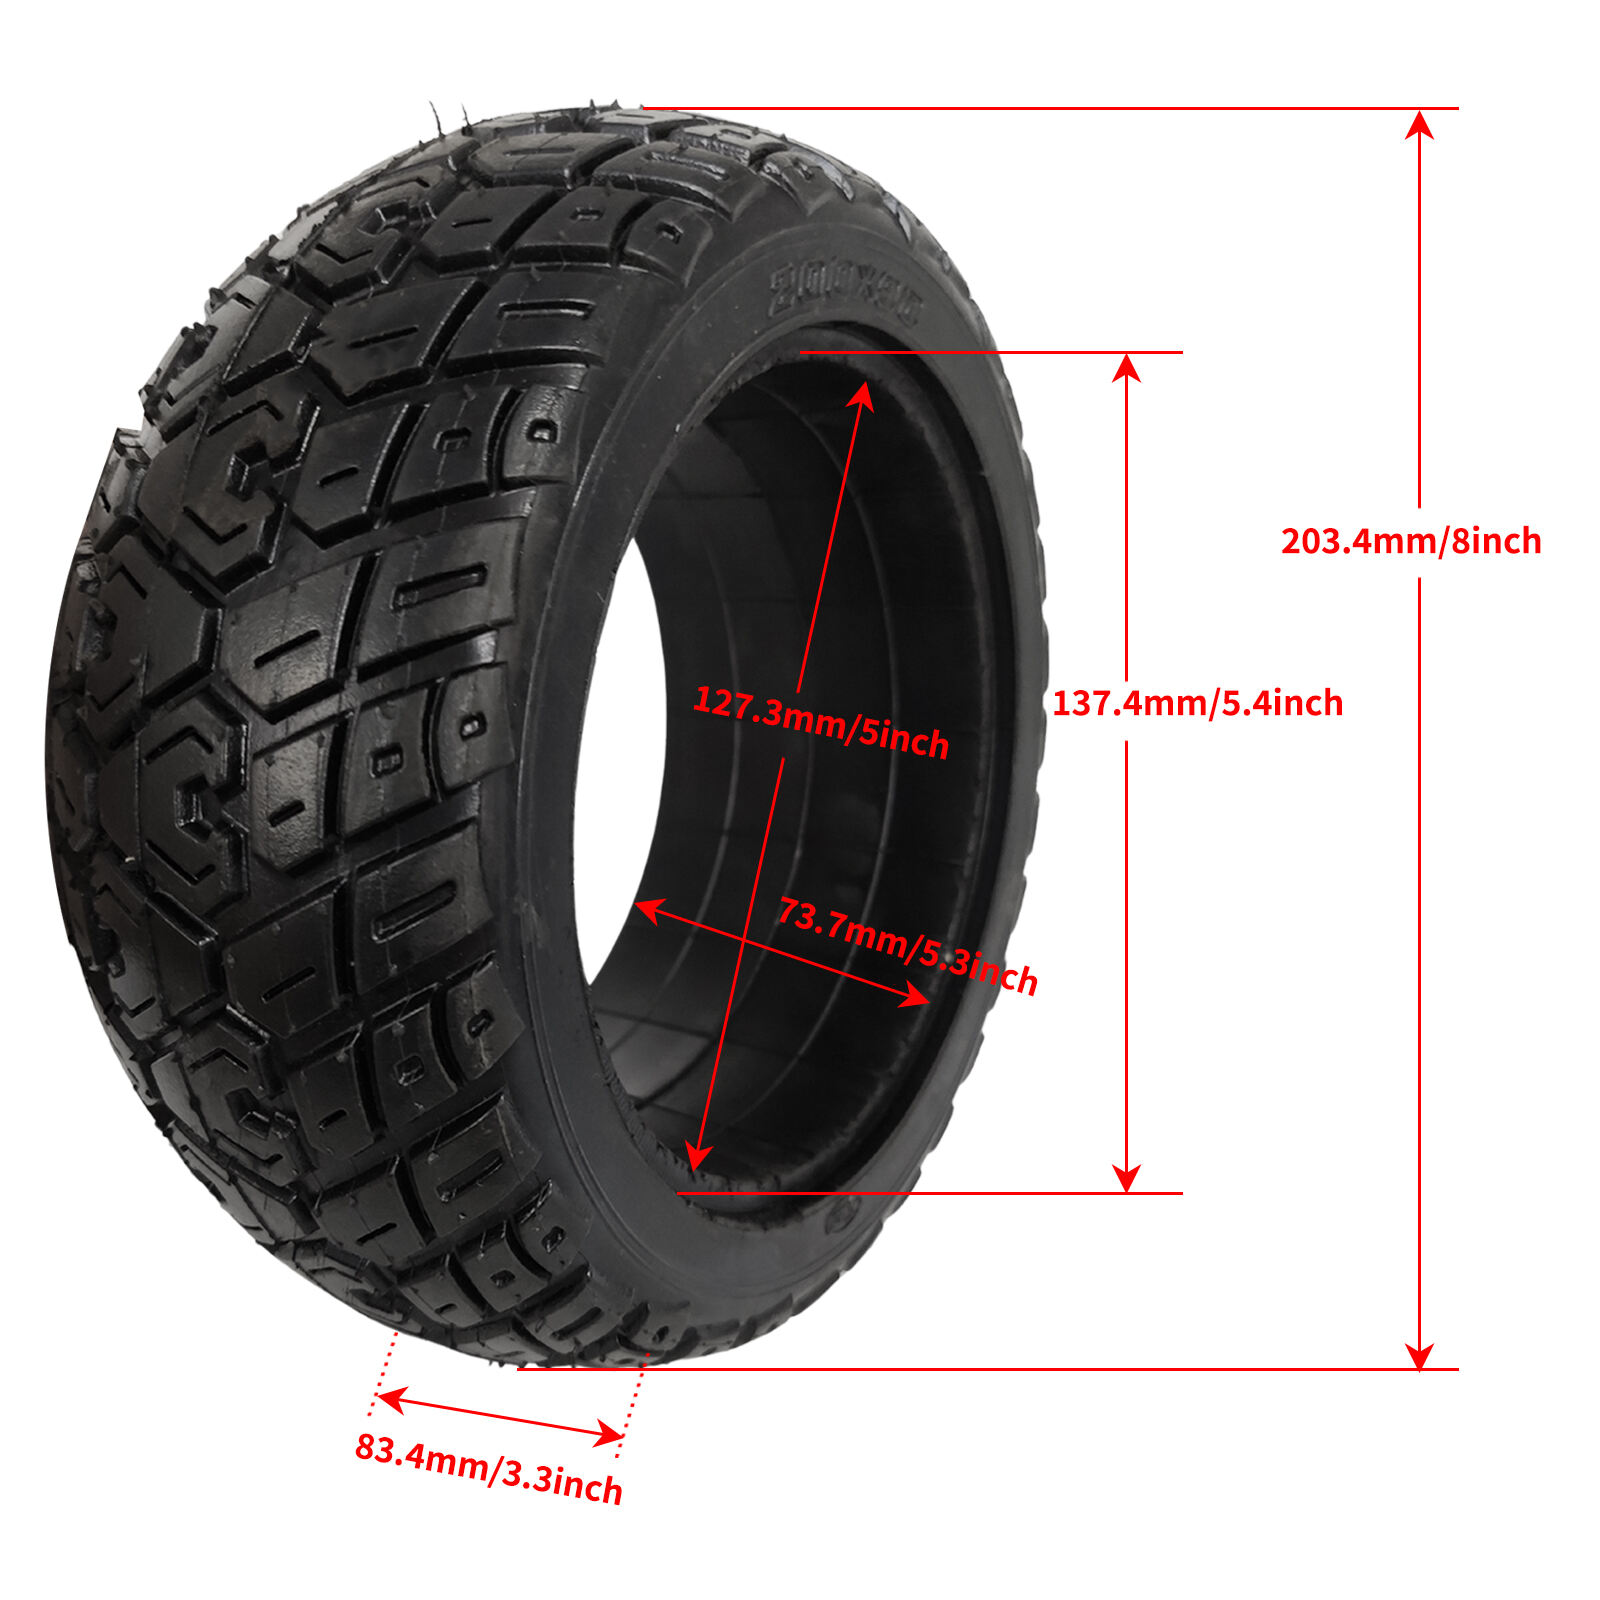 8" 200x90 Flat-Free Electric Scooter Replacement Tire, 8 inch Semi-Pneumatic Rubber Tire for Torsion Car details